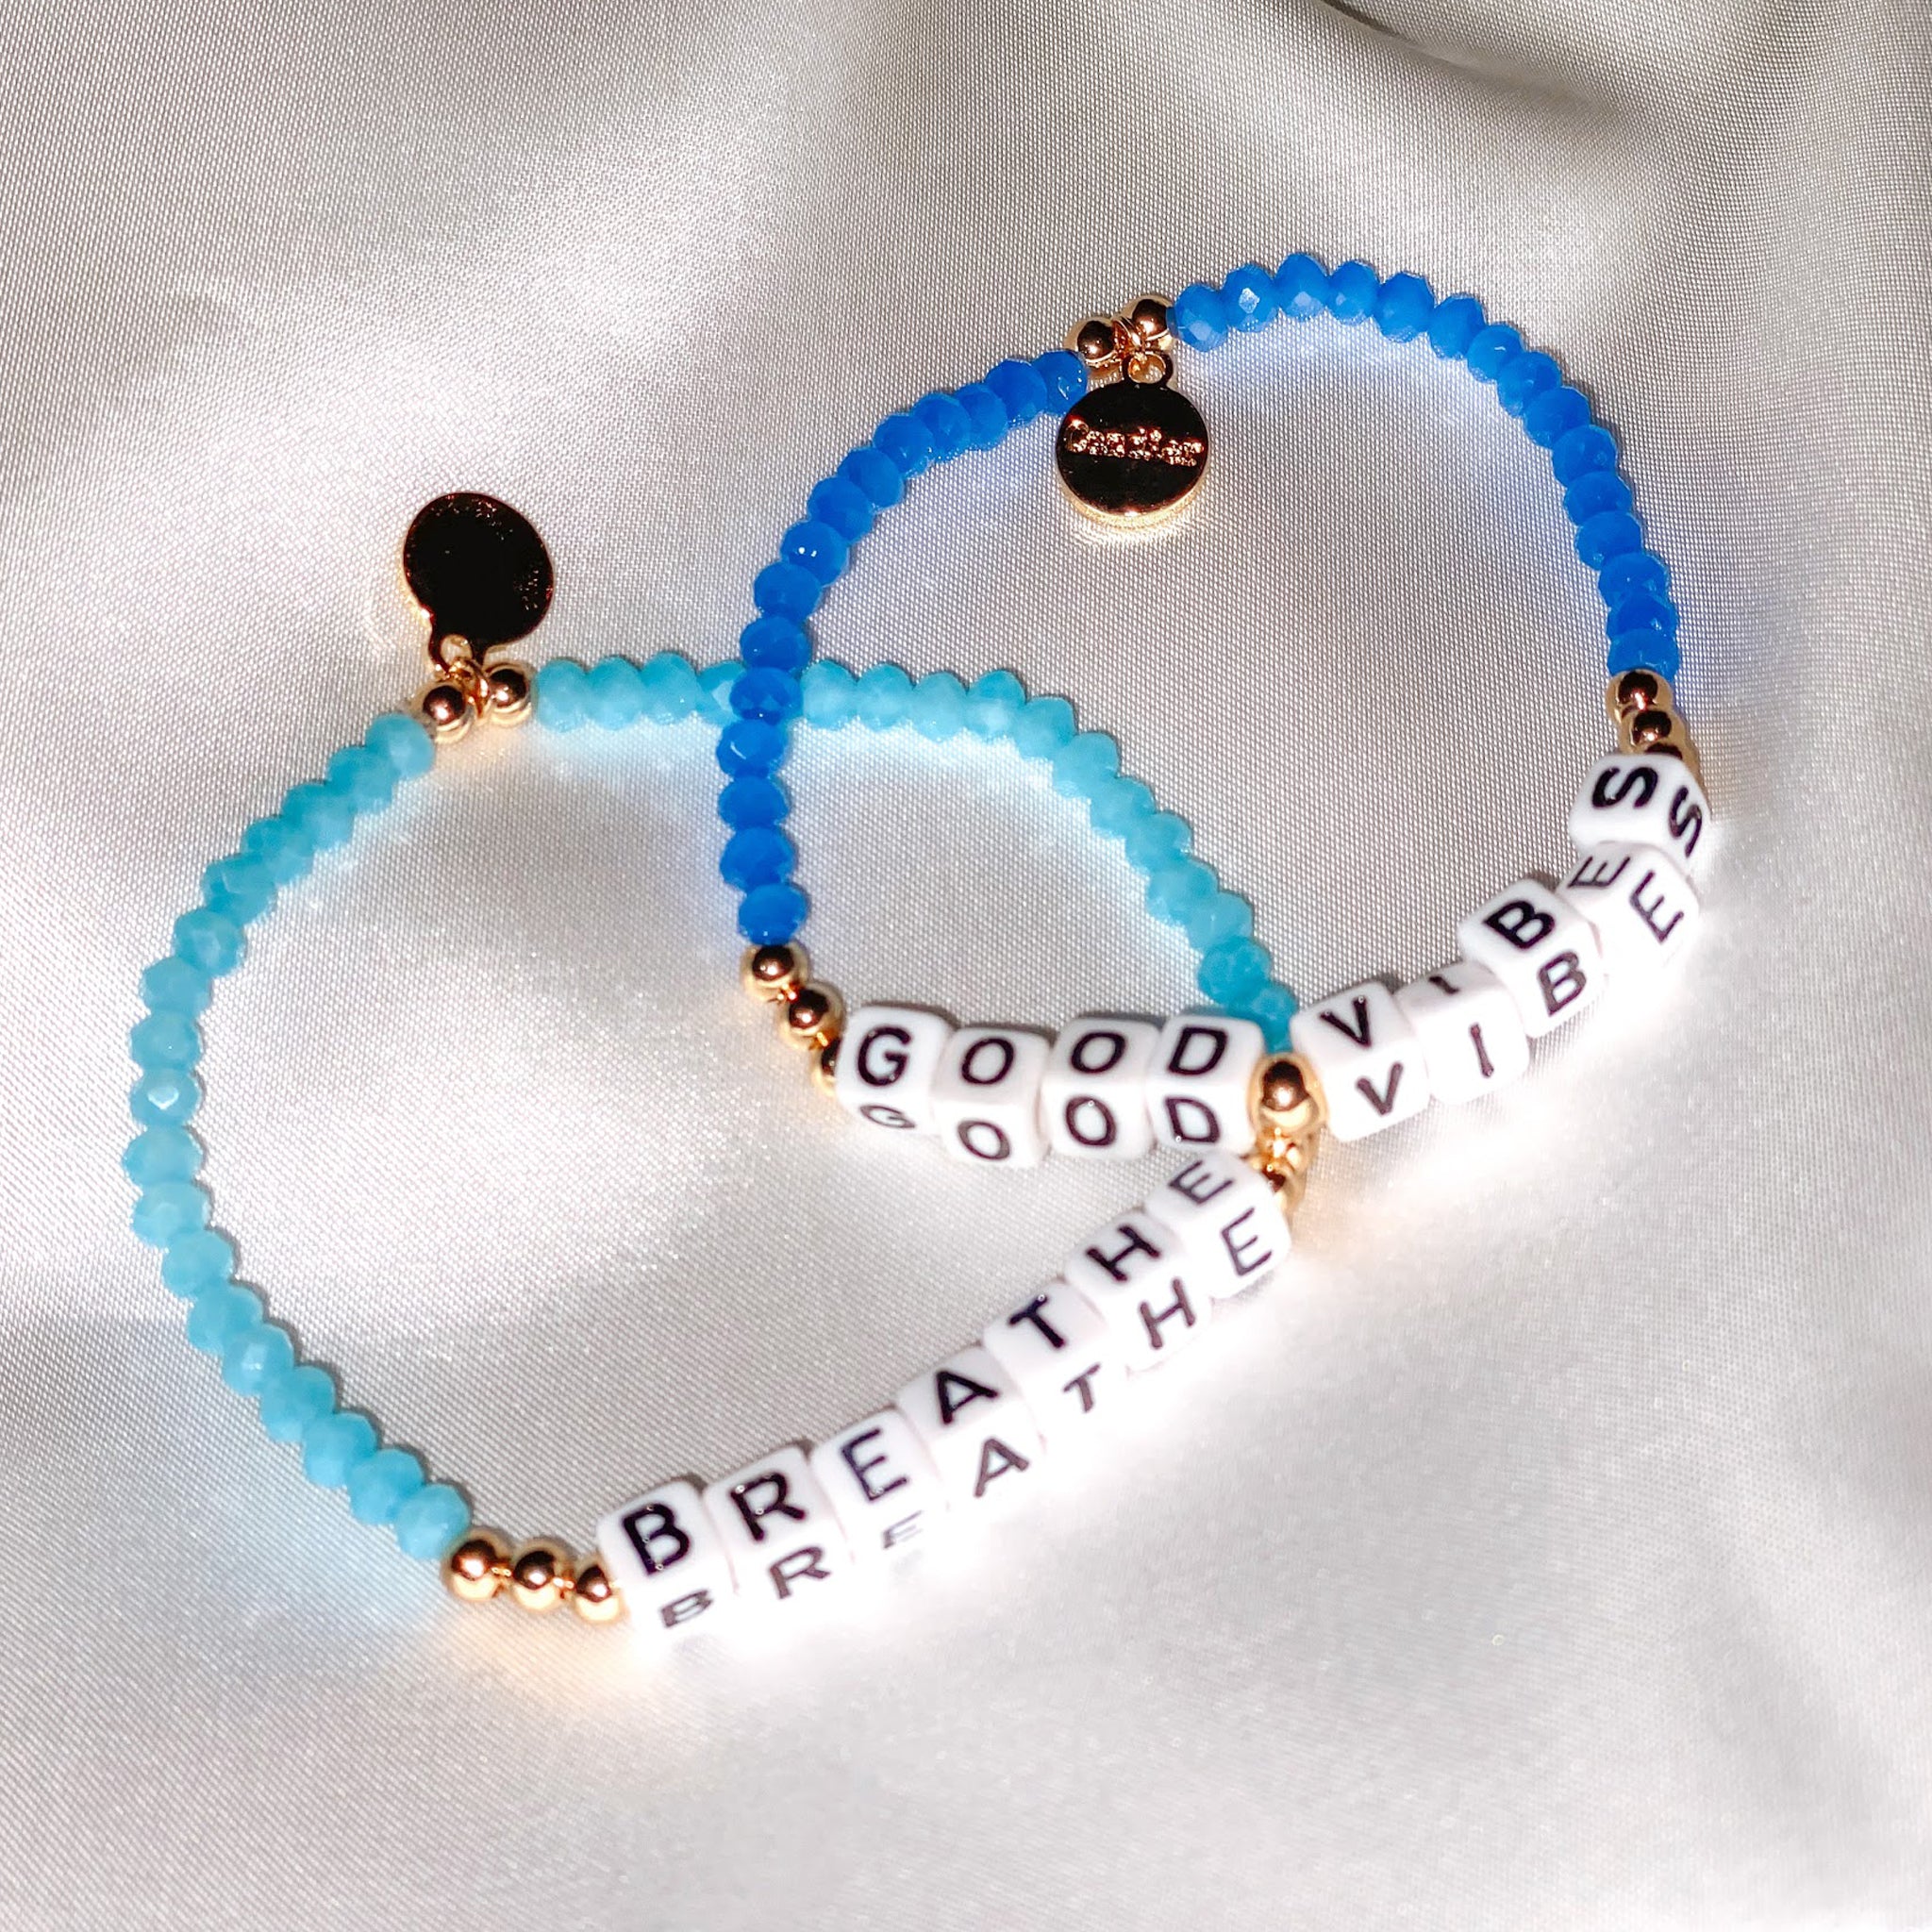 Girls Friendship Beaded Bracelets With Glass Crystal Charm Stretch  Wristband Anklets For Birthday Cute Tote Bags In Pink, Purple, And Blue  From Superhero2, $0.68 | DHgate.Com